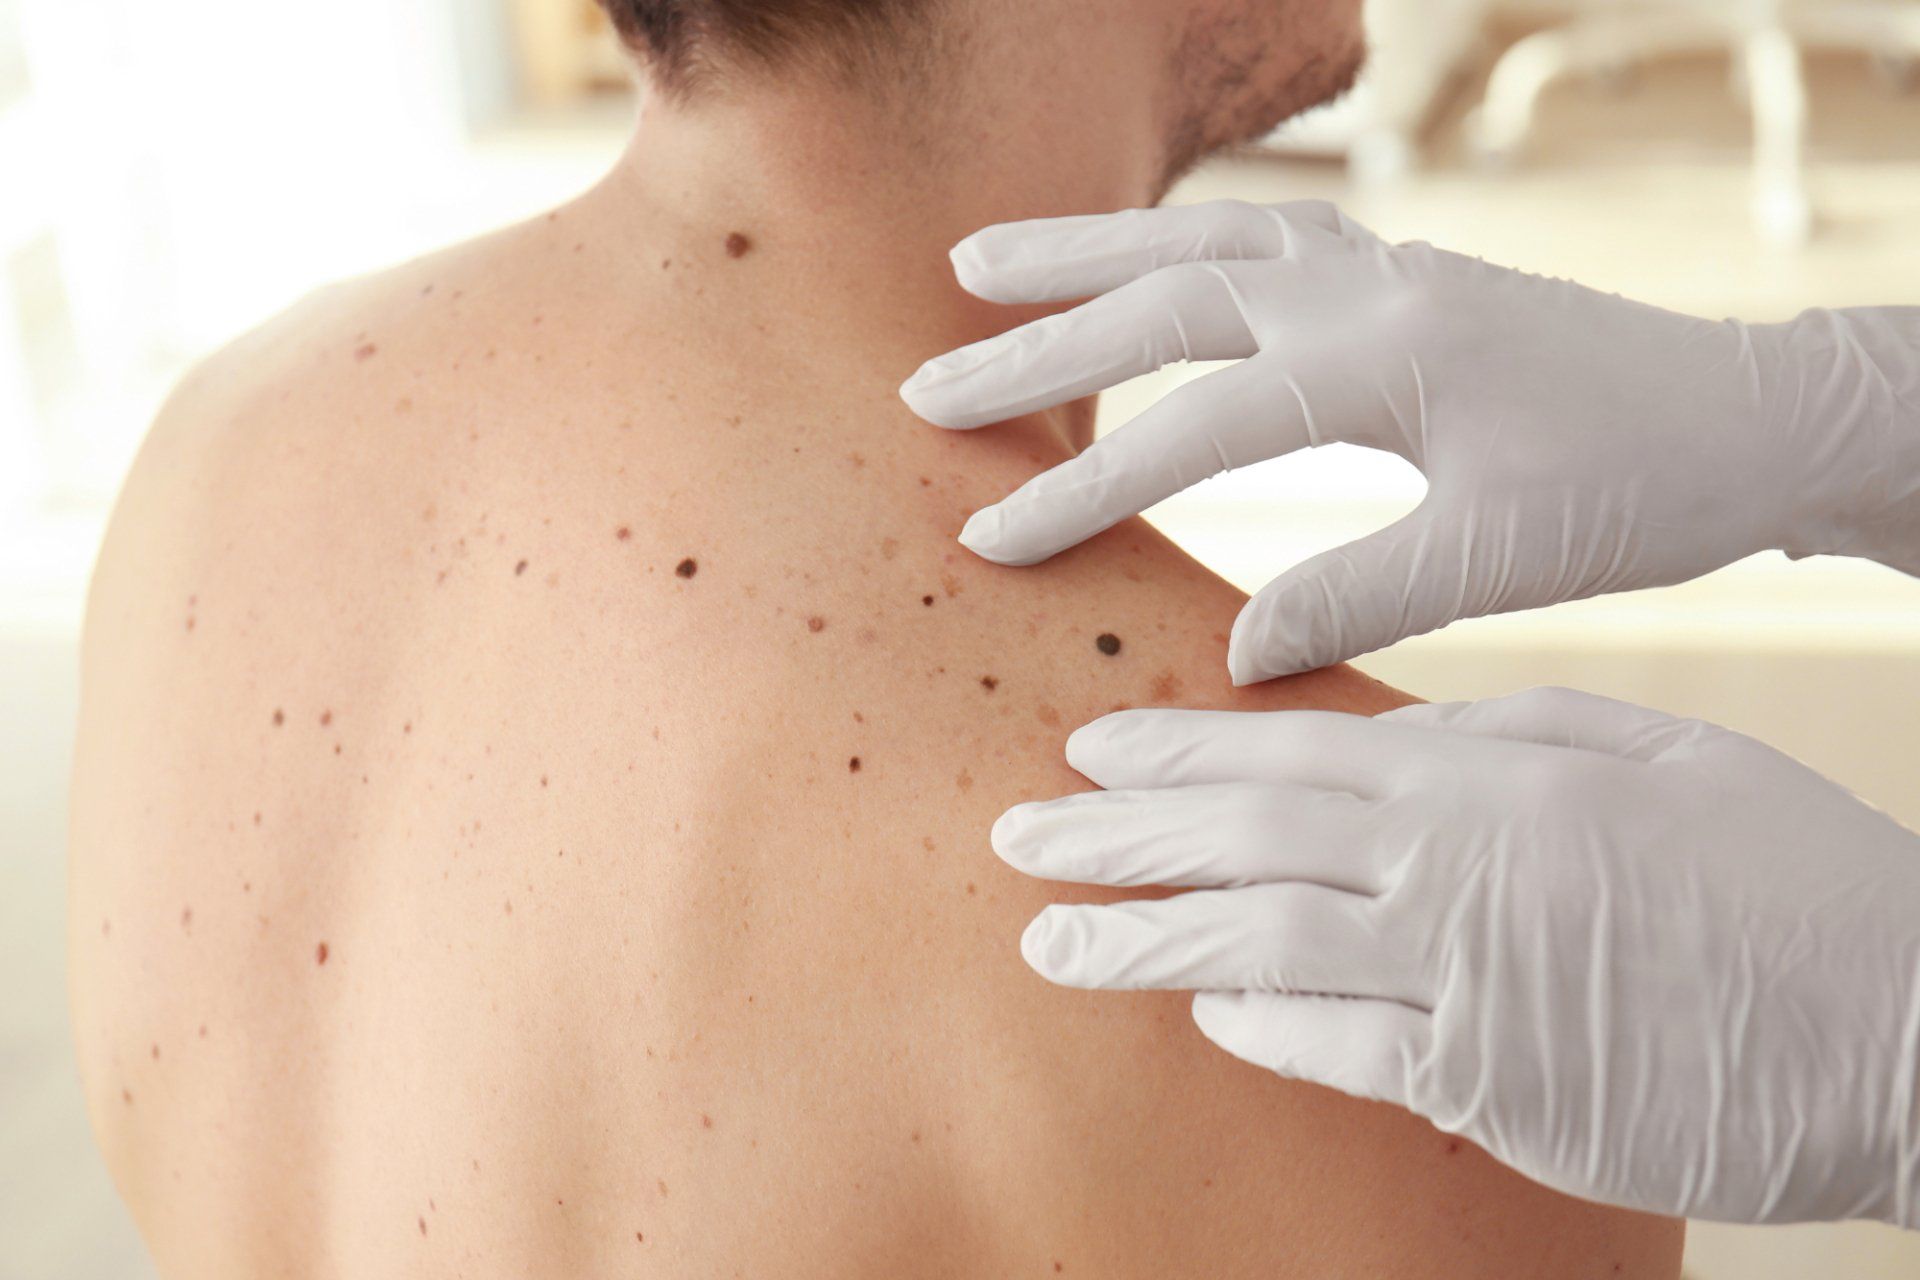 dermatologist examines moles on patient's back during skin exam